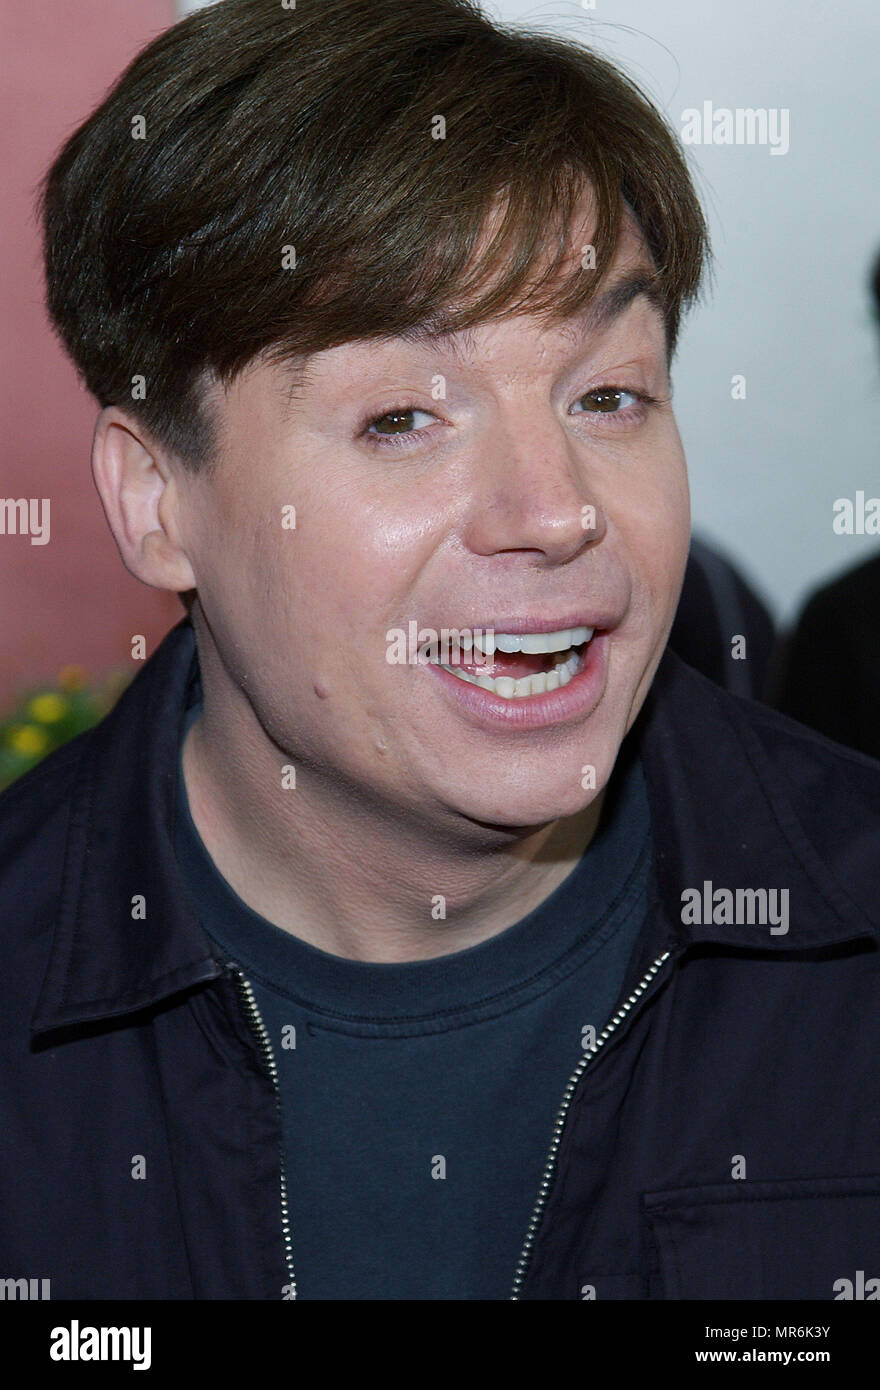 Mike Myers arriving at the ' Dr. Seuss 'The Cat In The Hat Premiere '   at the Universal Amphitheatre in Los Angeles. November 8, 2003.MyersMike80 Red Carpet Event, Vertical, USA, Film Industry, Celebrities,  Photography, Bestof, Arts Culture and Entertainment, Topix Celebrities fashion /  Vertical, Best of, Event in Hollywood Life - California,  Red Carpet and backstage, USA, Film Industry, Celebrities,  movie celebrities, TV celebrities, Music celebrities, Photography, Bestof, Arts Culture and Entertainment,  Topix, headshot, vertical, one person,, from the year , 2003, inquiry tsuni@Gamma-U Stock Photo